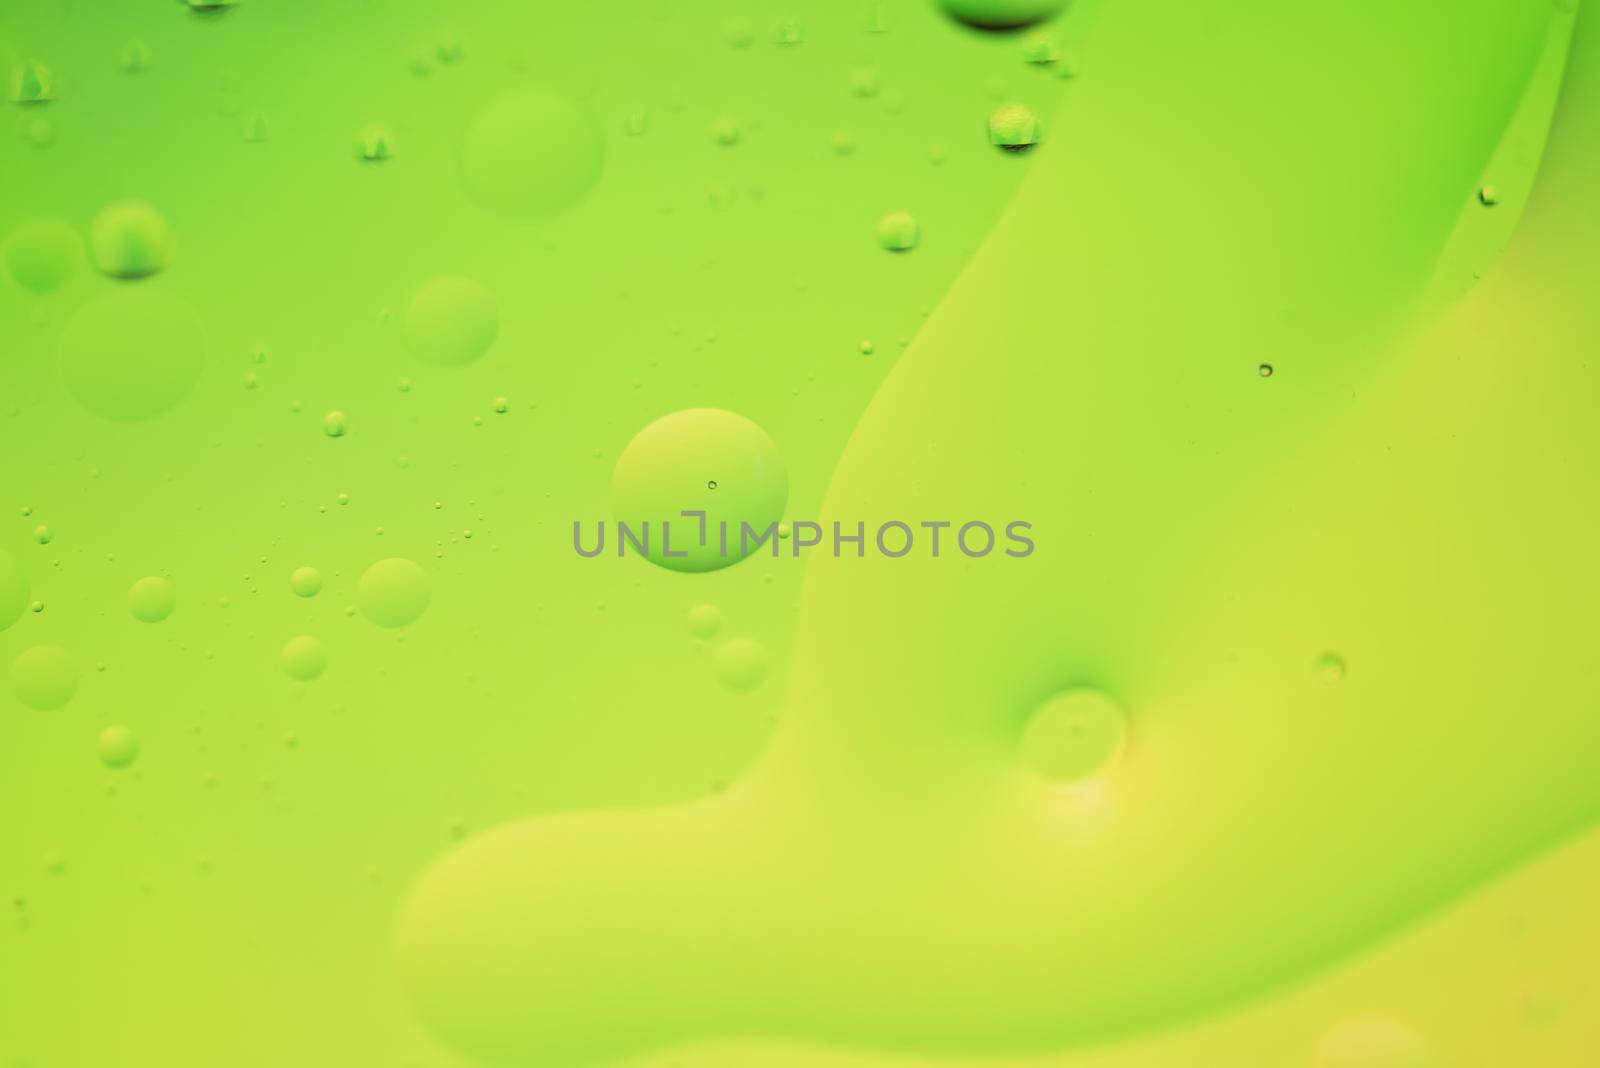 Green and yellow abstract background picture made with oil, water and soap by anytka